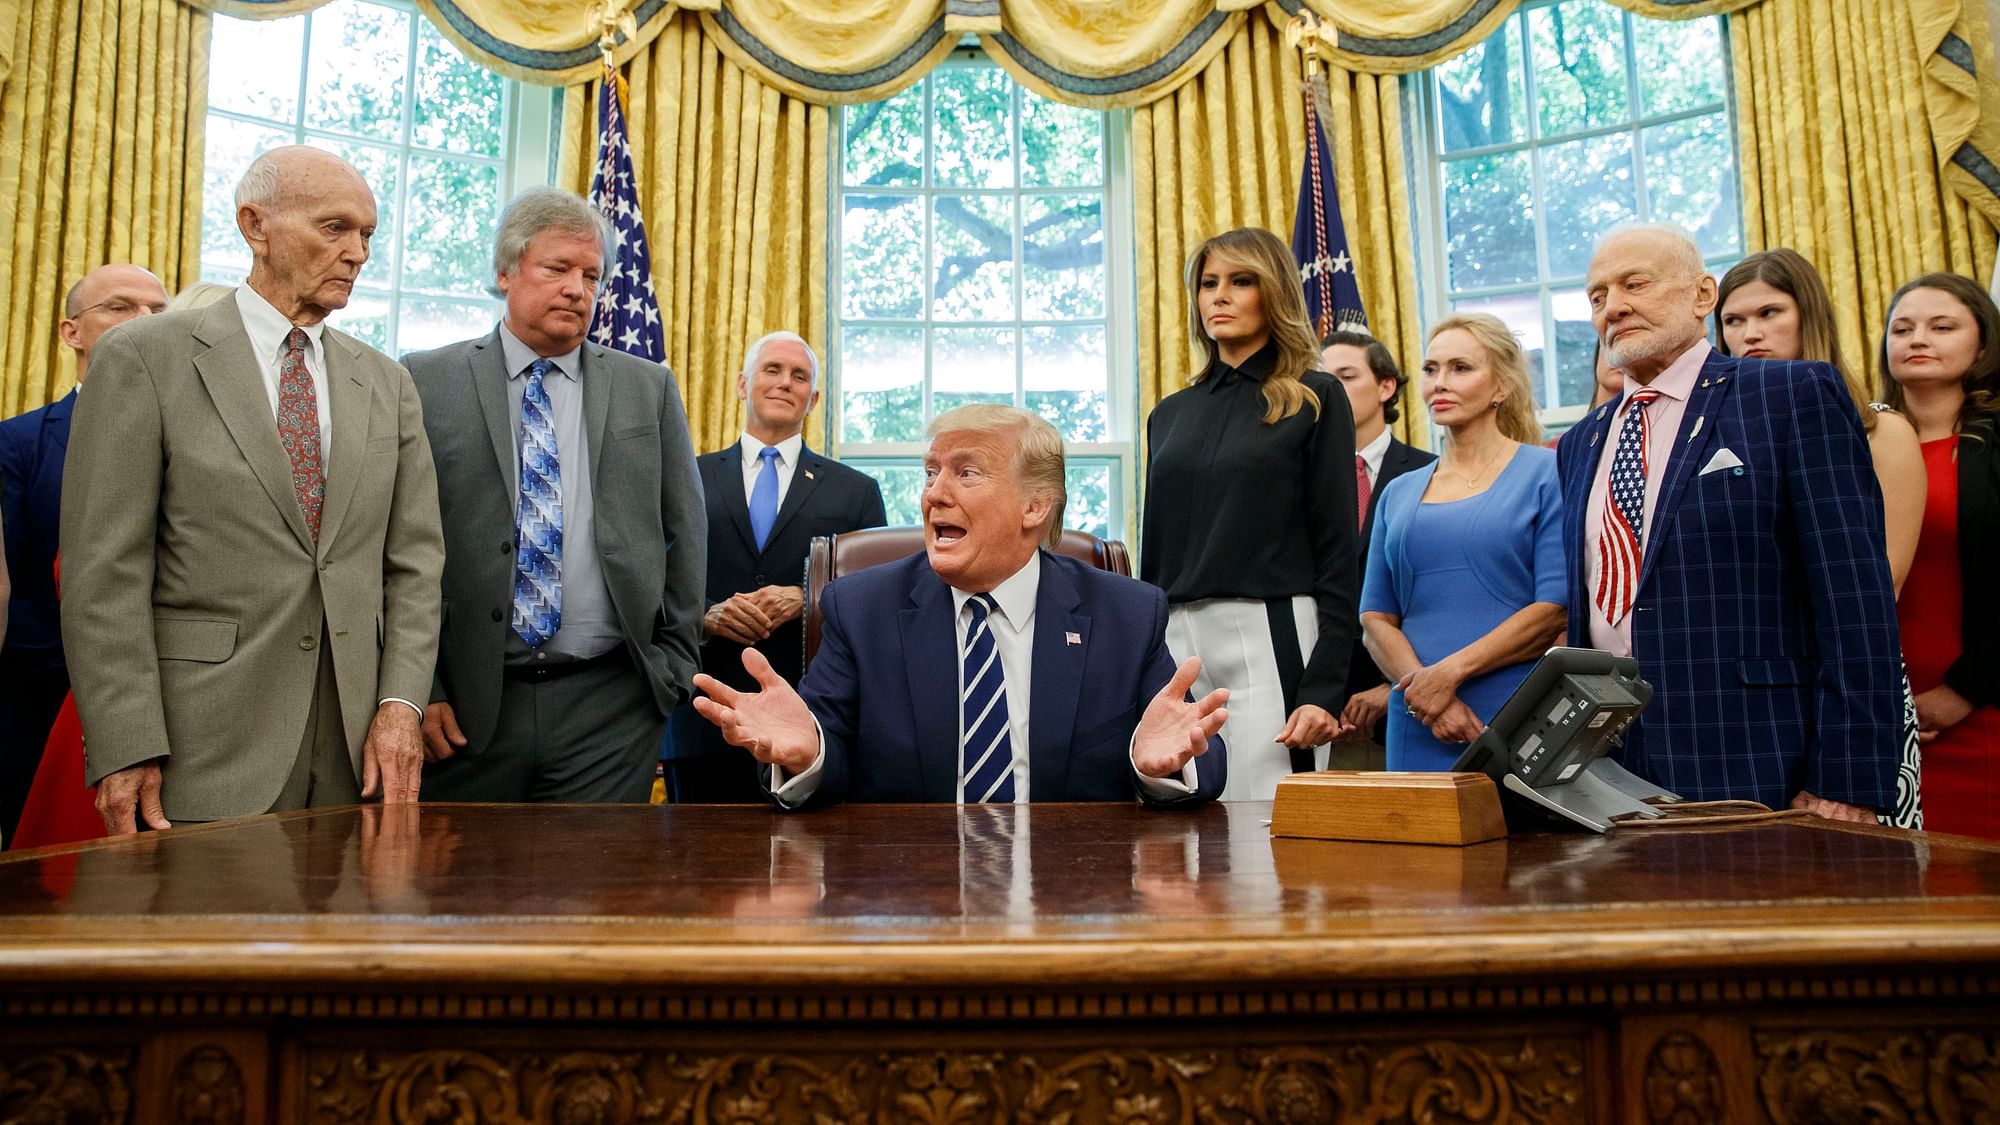 Donald Trump with Apollo 11 astronauts, Michael Collins (L) and ‘Buzz’ Aldrin (R) and Eric Armstrong, son of Neil Armstrong, second from left.&nbsp;